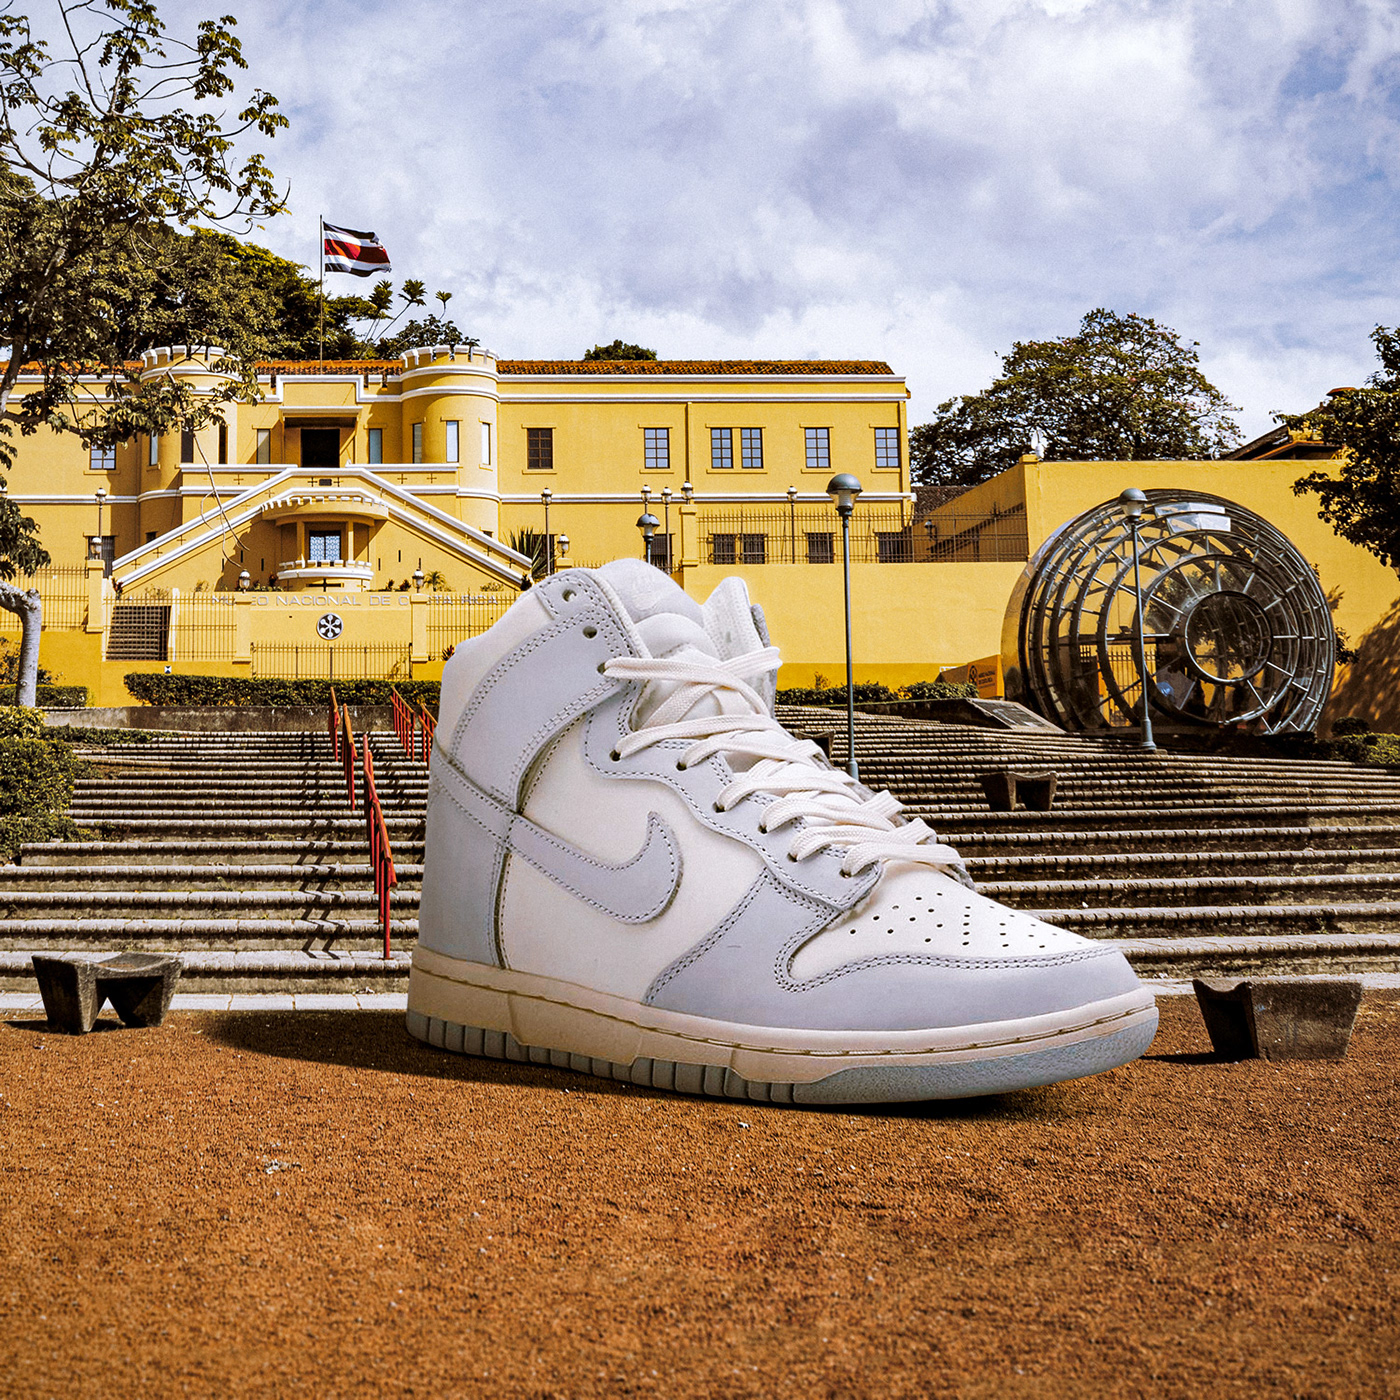 Photo composite of giant sneaker in nature. Retouching using Photoshop
